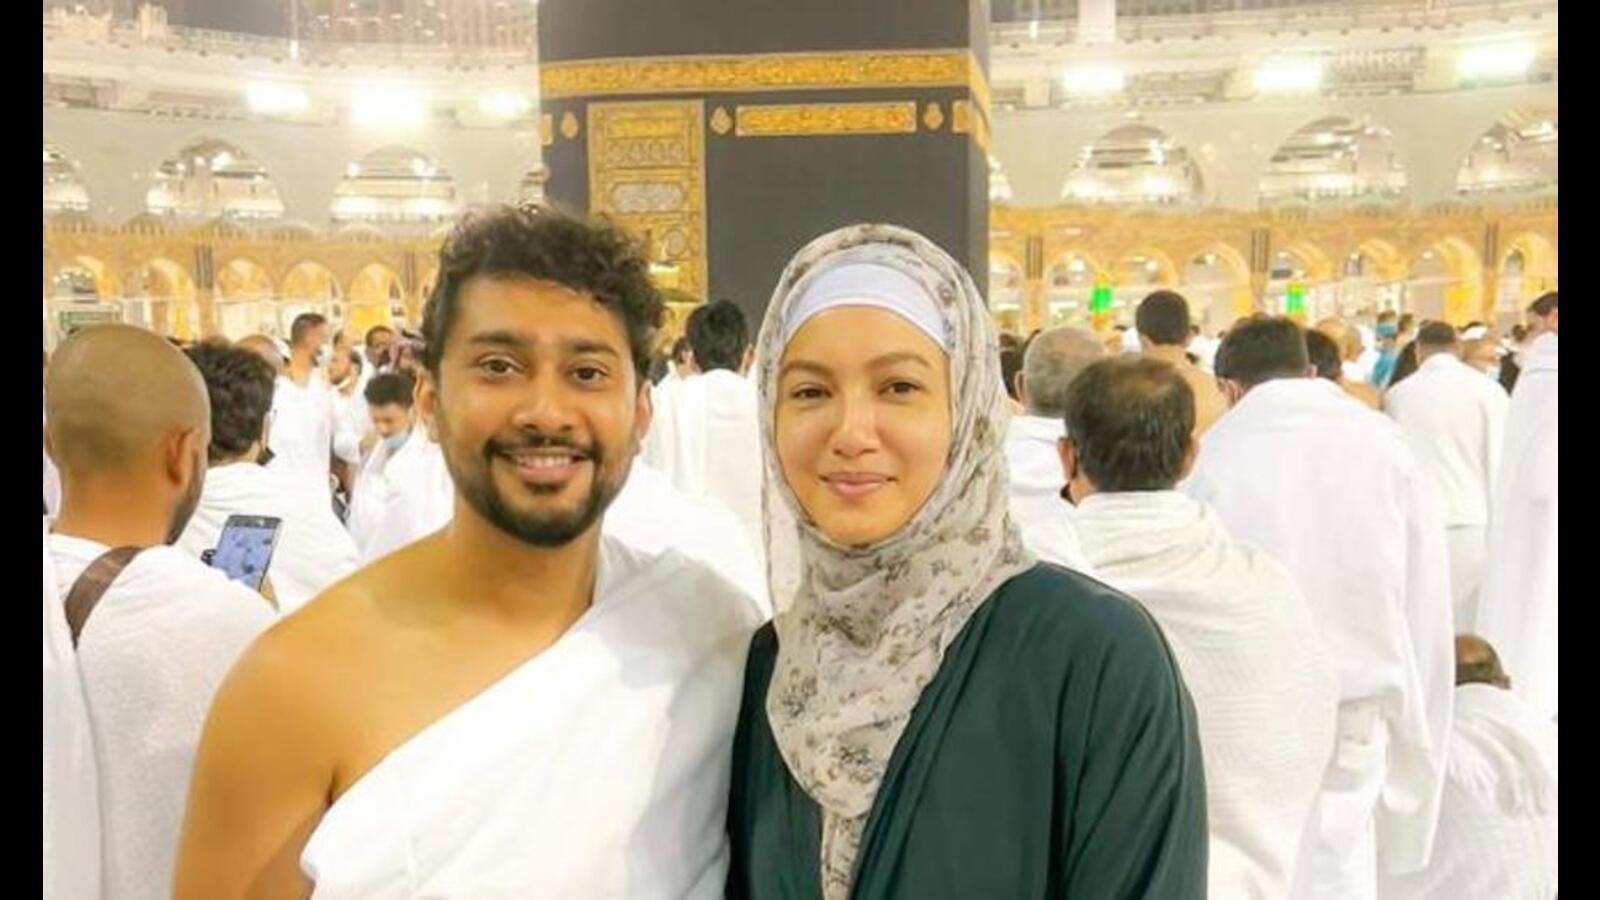 We made the most of it: Gauahar Khan on her first trip to Mecca with Zaid Darbar